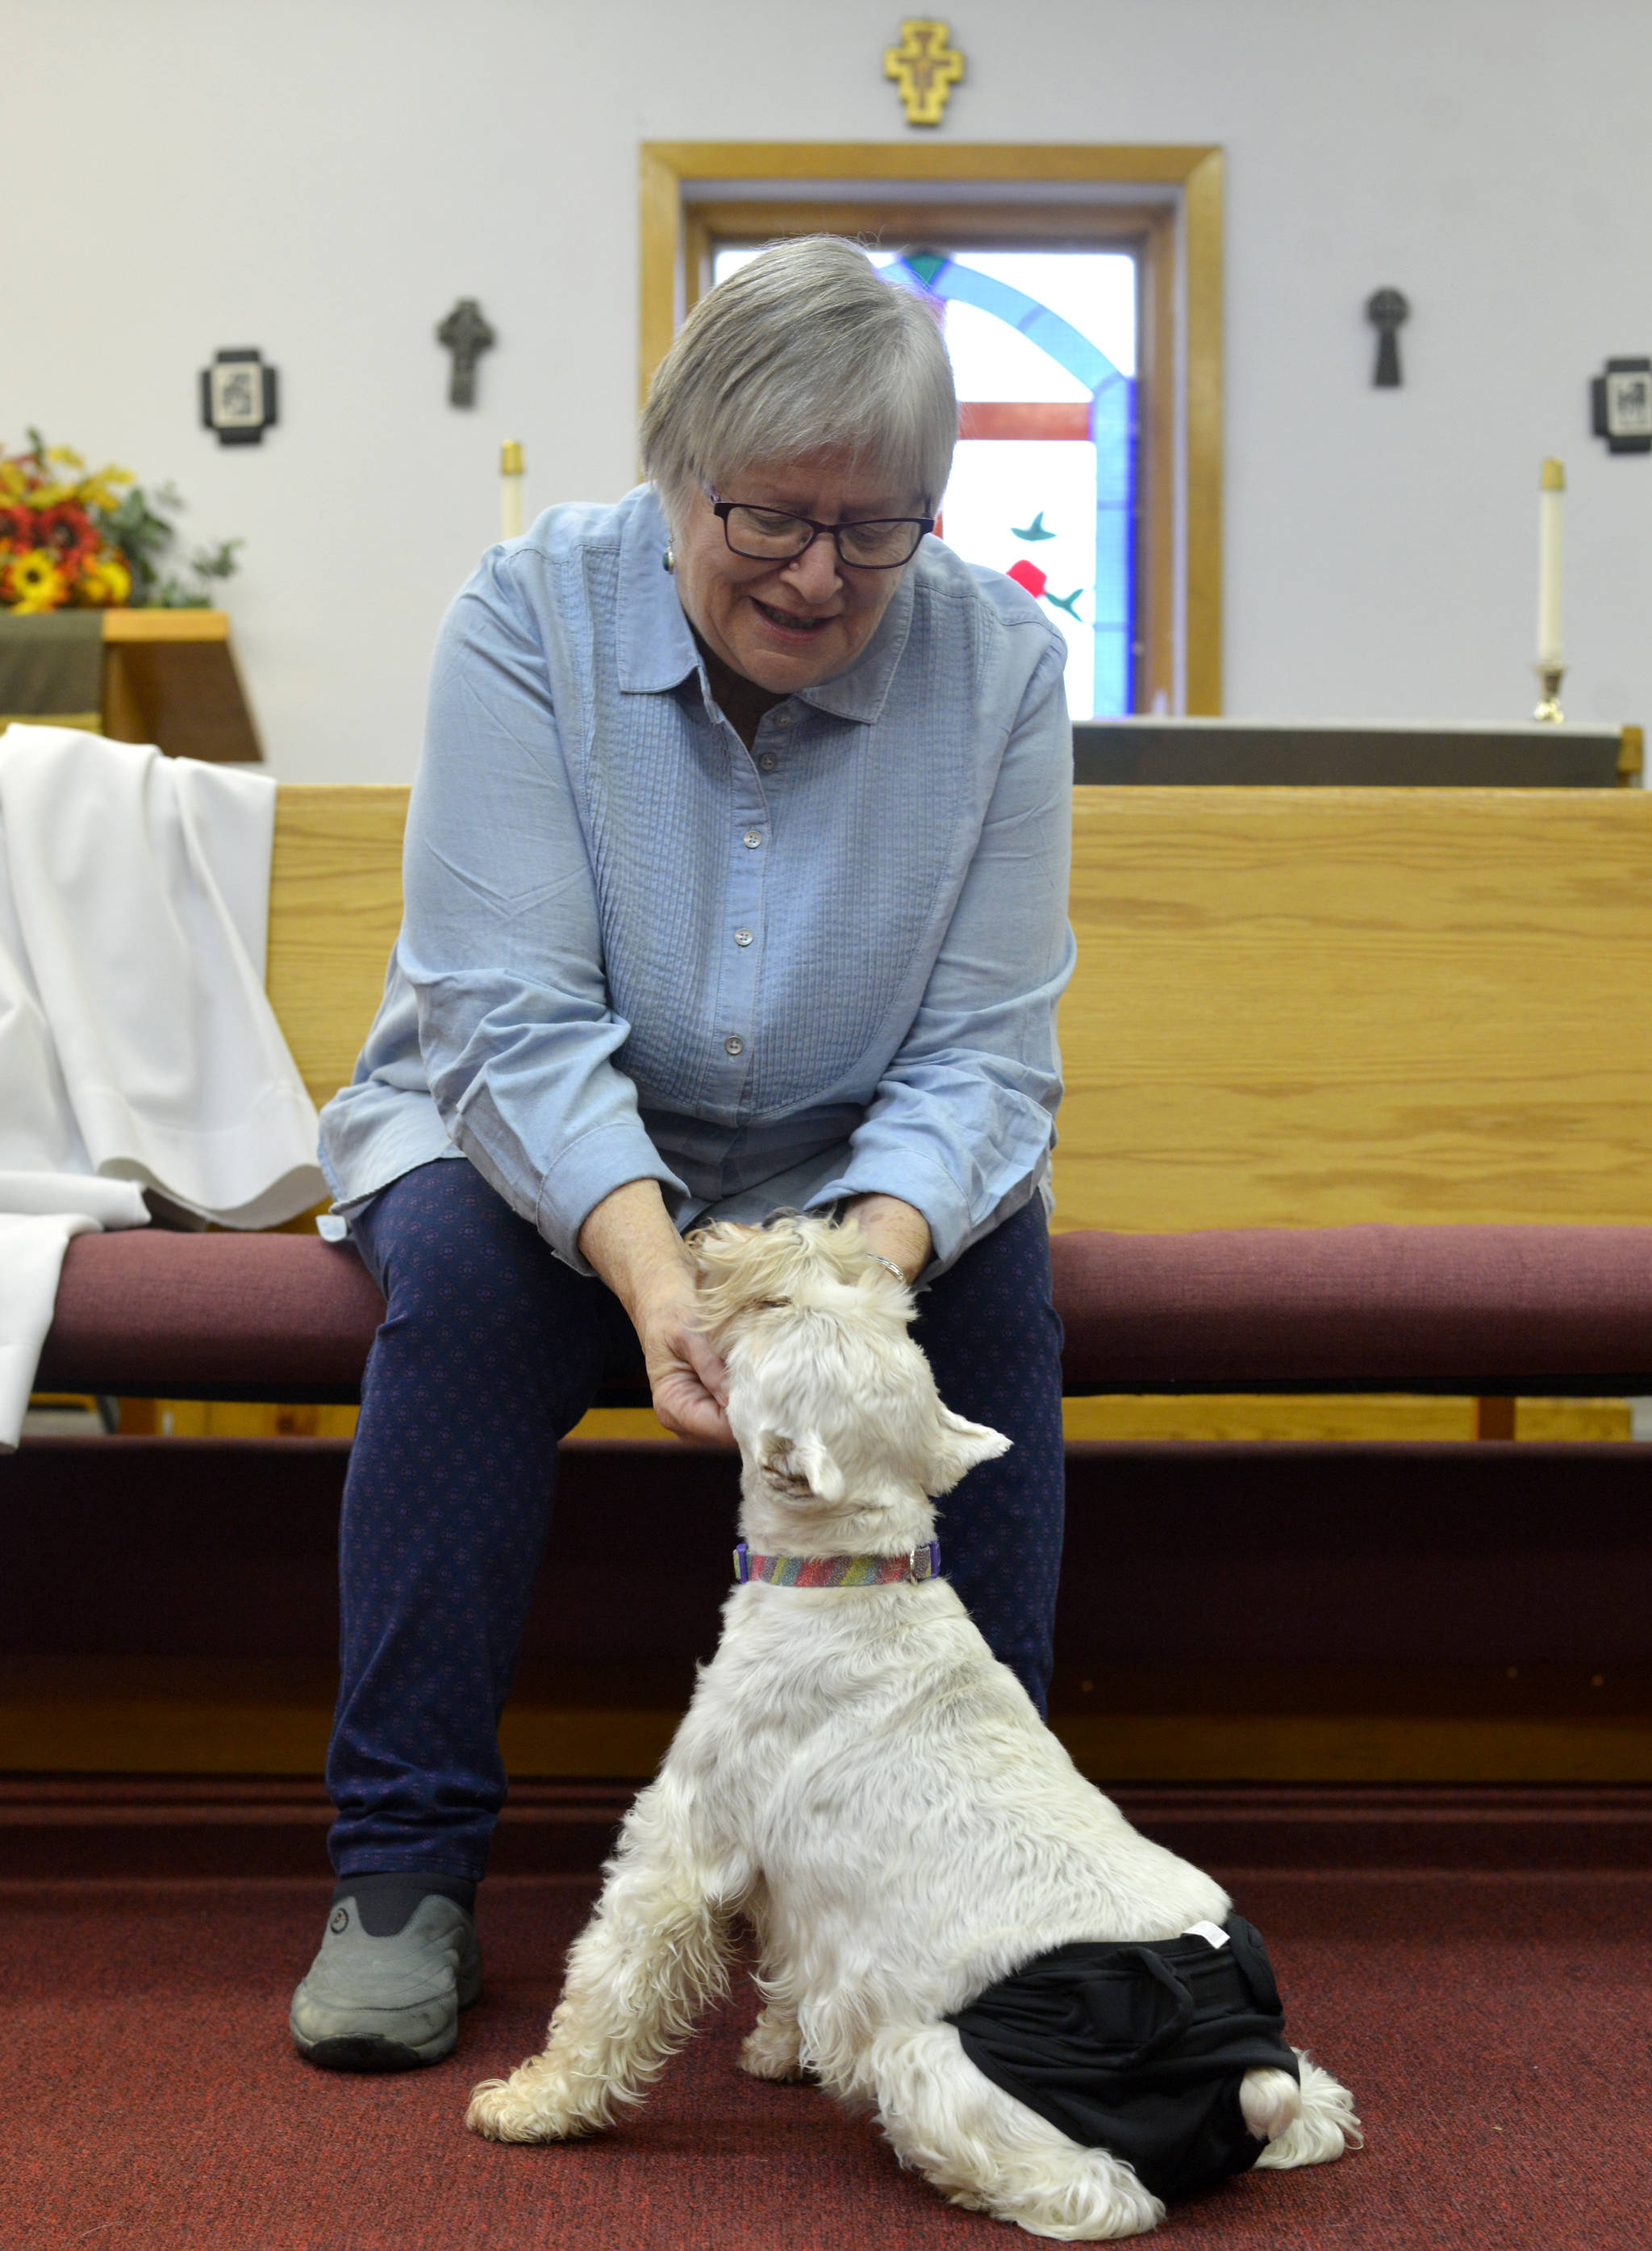 Marti Slater pets her dog, Abigal, while attending Blessing of the Animals held at St. Francis by the Sea in Kenai, Alaska on Oct. 8, 2017. The joint event was hosted St. Francis by the Sea Episcopal Church and Our Lady of the Angels Catholic Church. (Photo by Kat Sorensen/Peninsula Clarion)